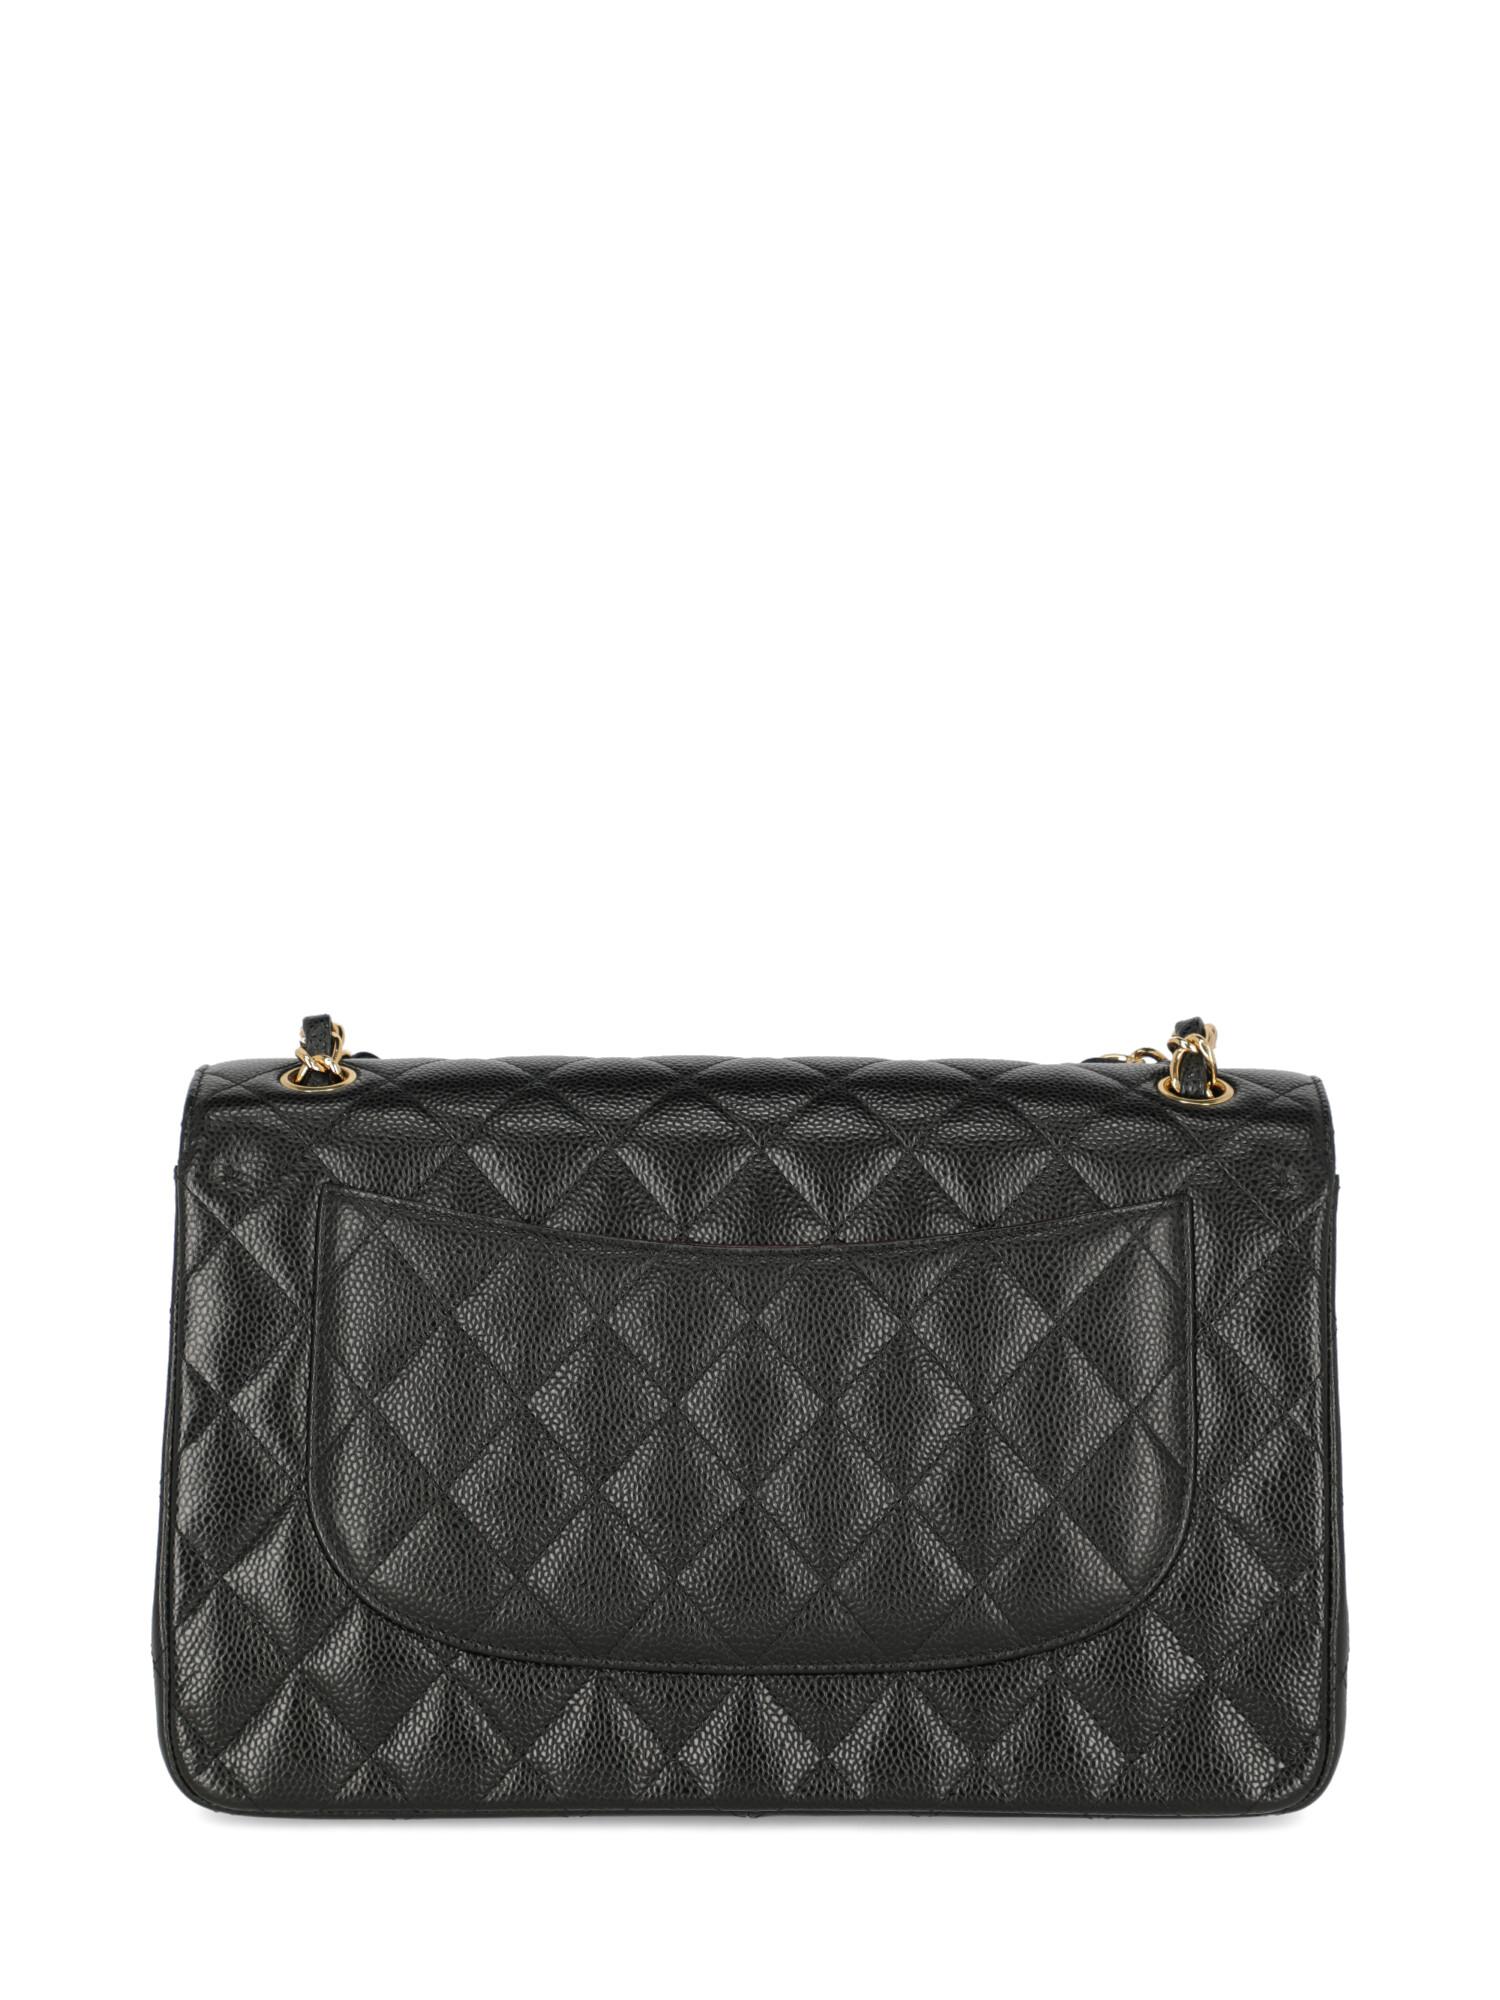 Chanel Women's Timeless Black Leather 1